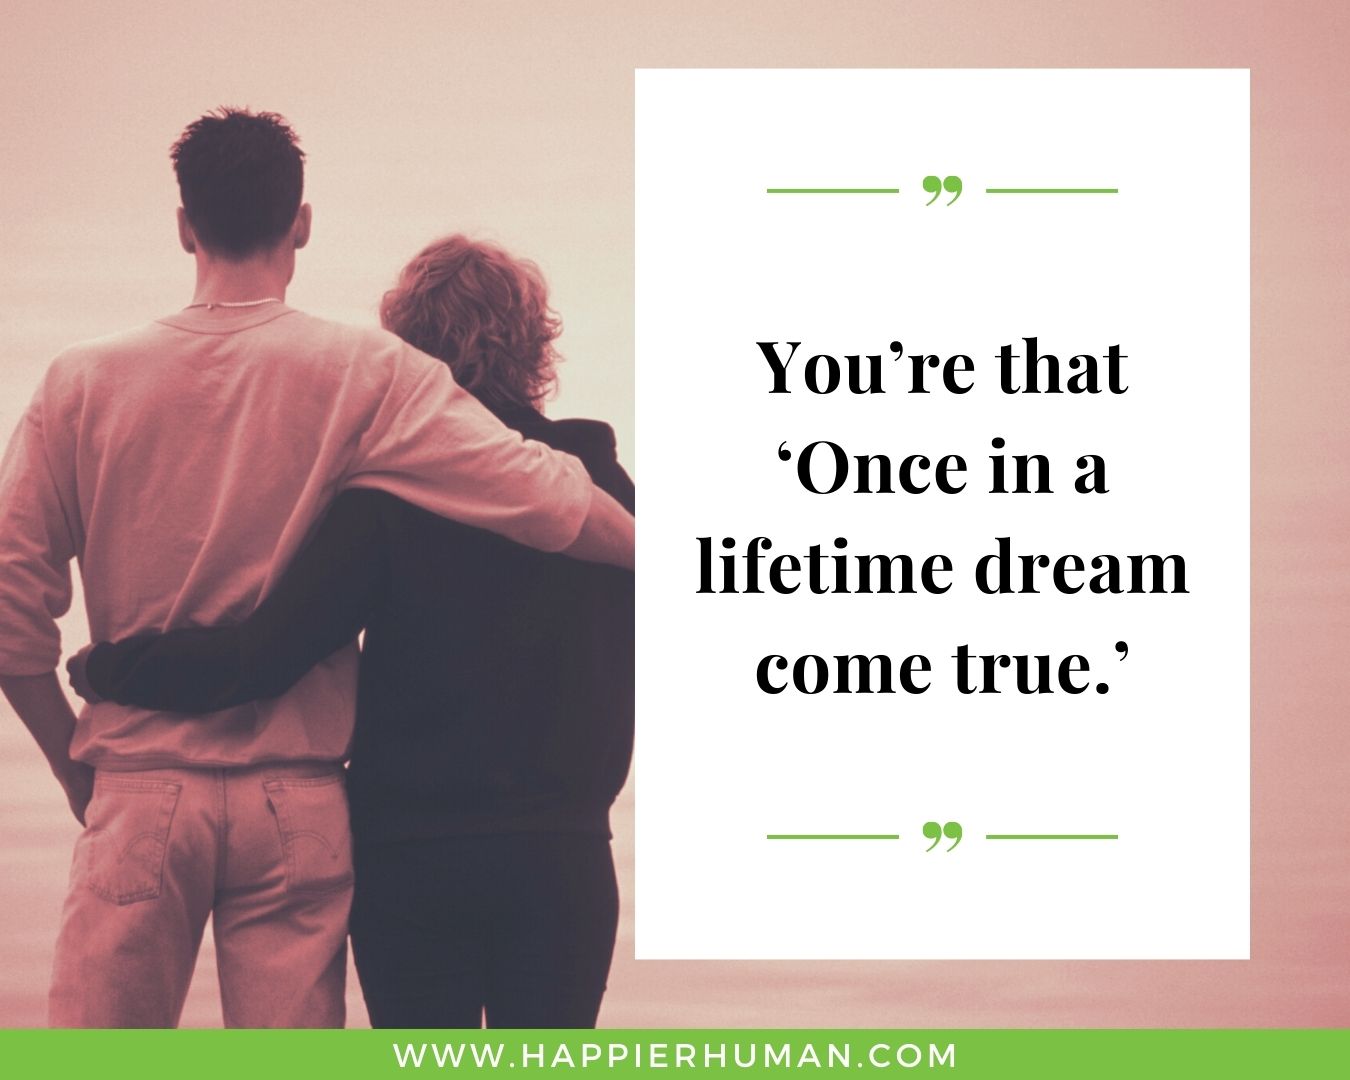 Short, Deep Love Quotes for Her - “You’re that ‘Once in a lifetime dream come true.’”